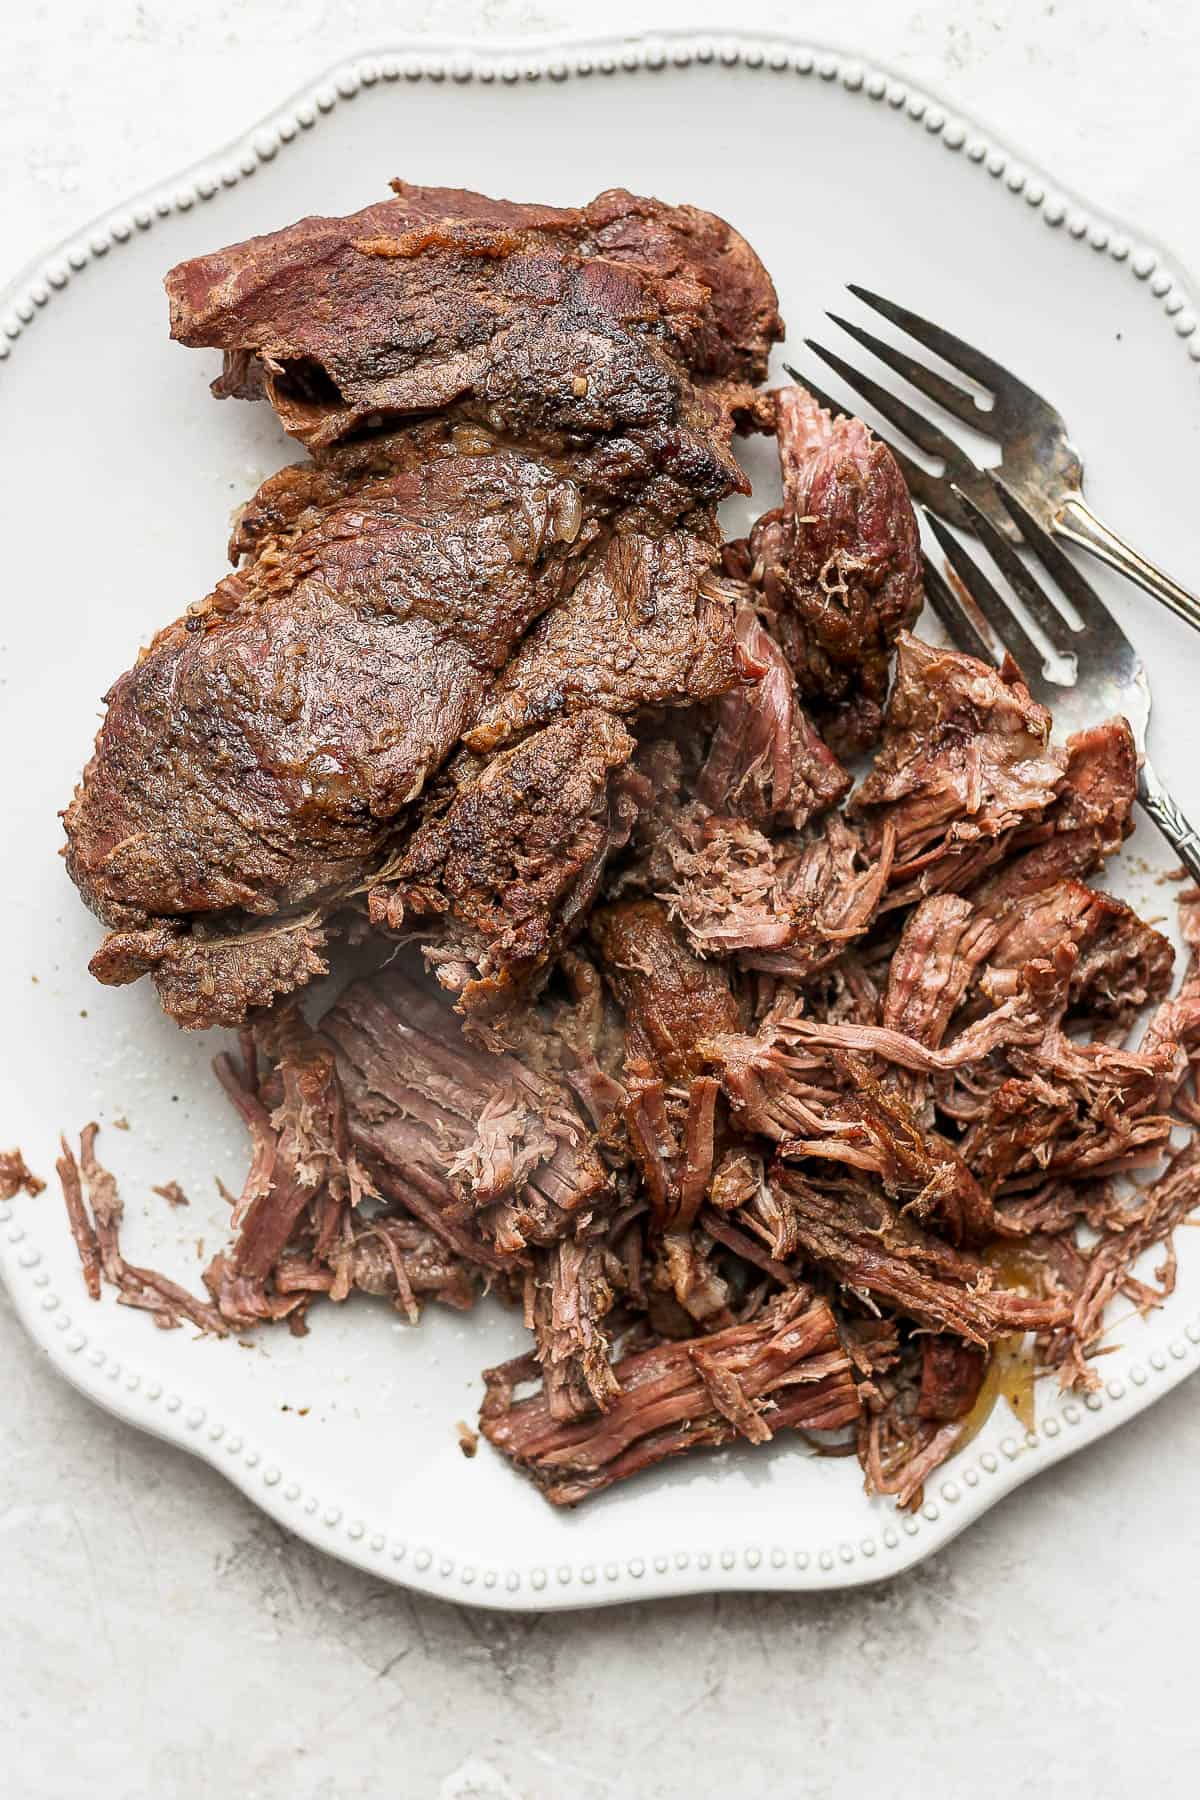 The cooked chuck roast on a plate and being shred by two forks.